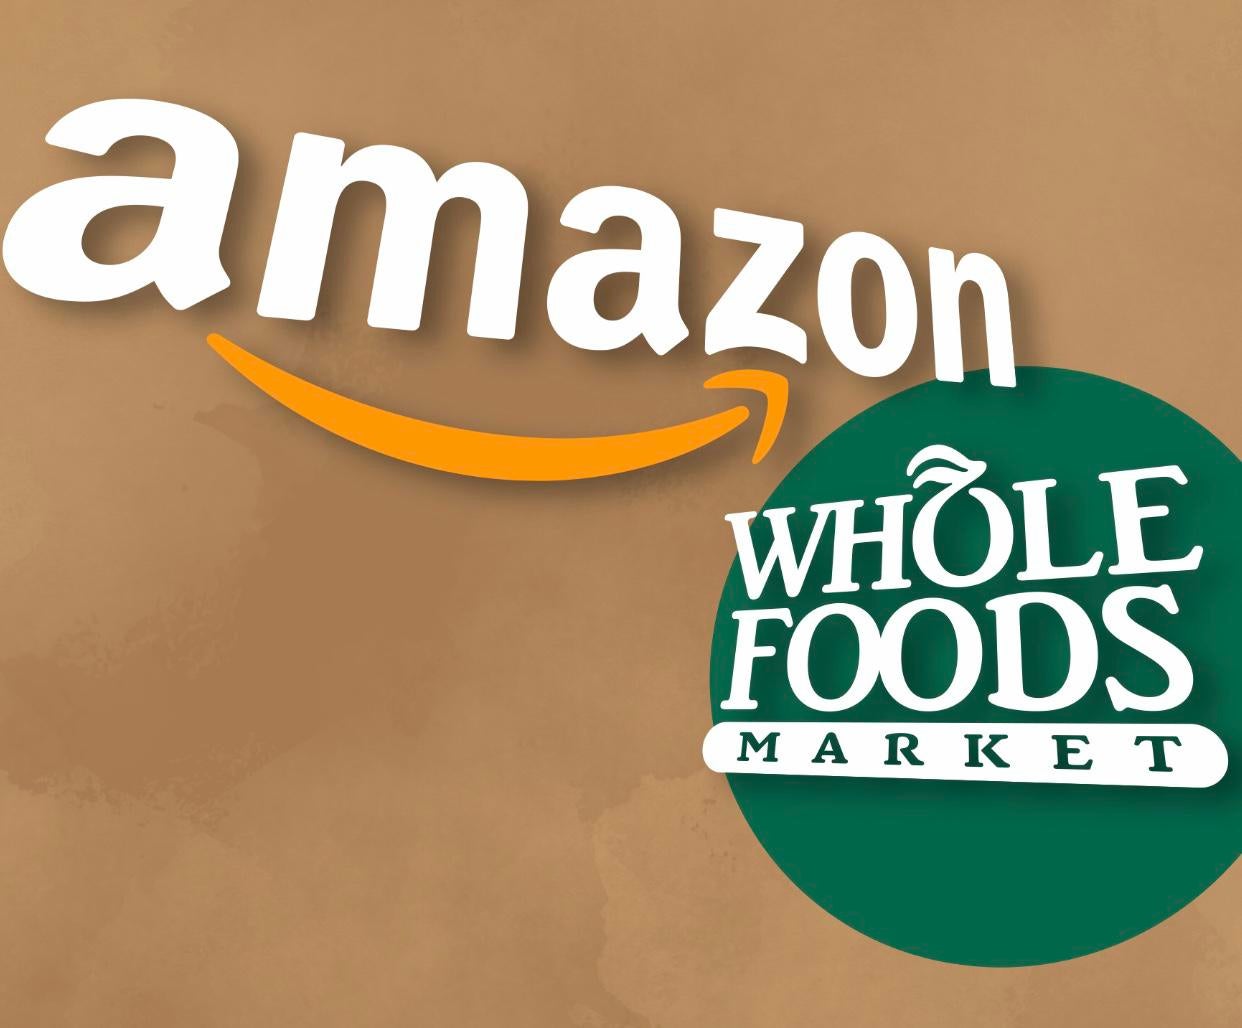 Amazon Whole Foods Shopper Reddit - Requirements, Benefits, And Insights From Employees